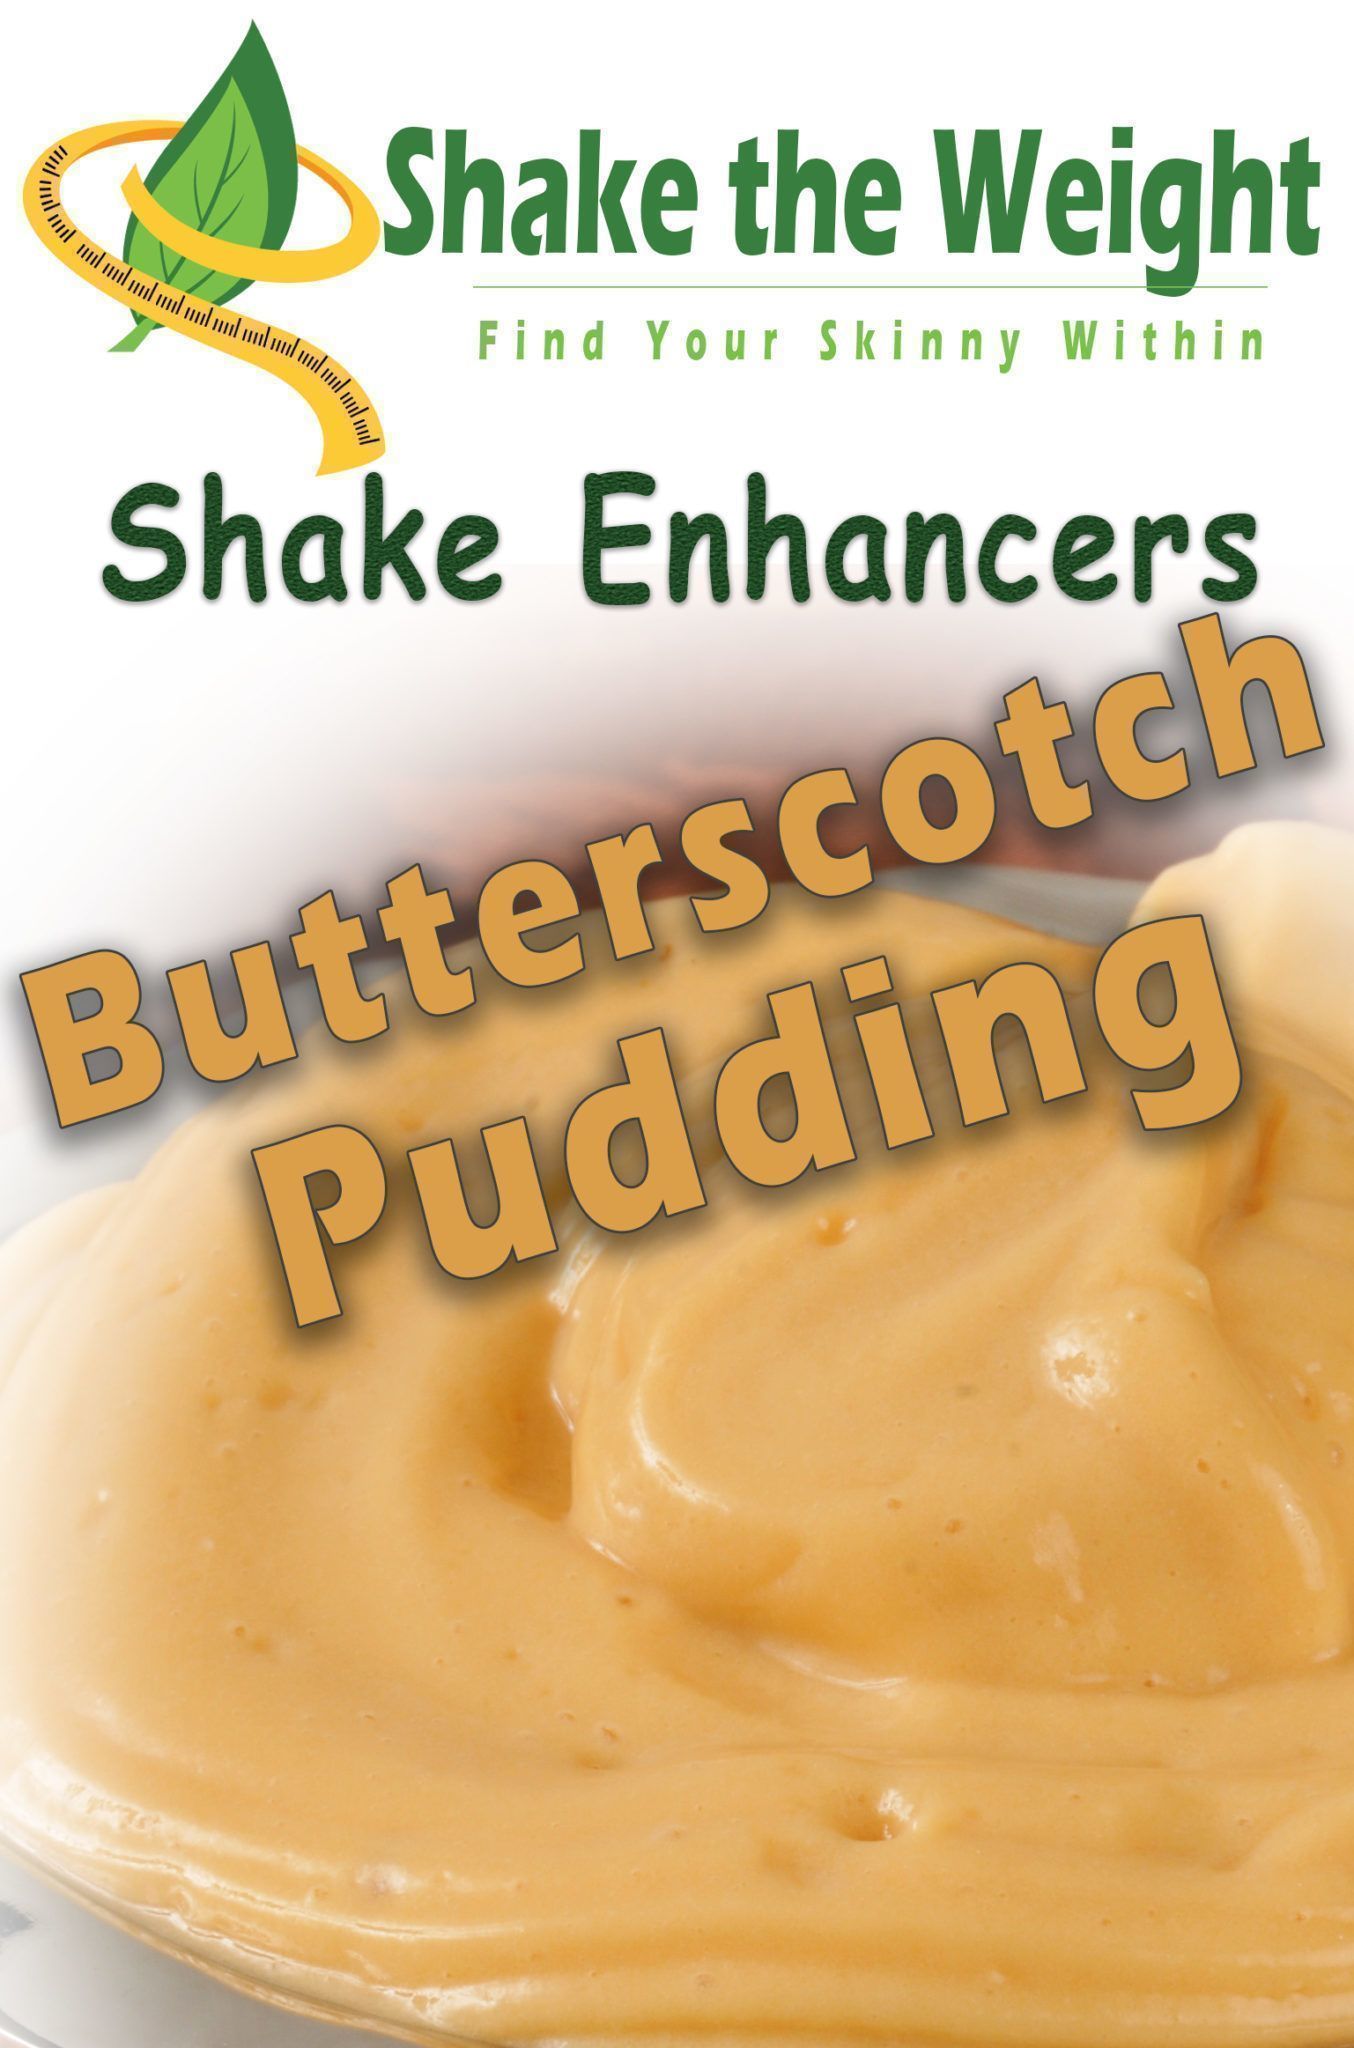 Butterscotch Pudding, smoothies, weight loss smoothies, smoothie diet, meal replacement smoothie, smoothies for weight loss, smoothie meal replacement, protein smoothies, 	Sugar free jello